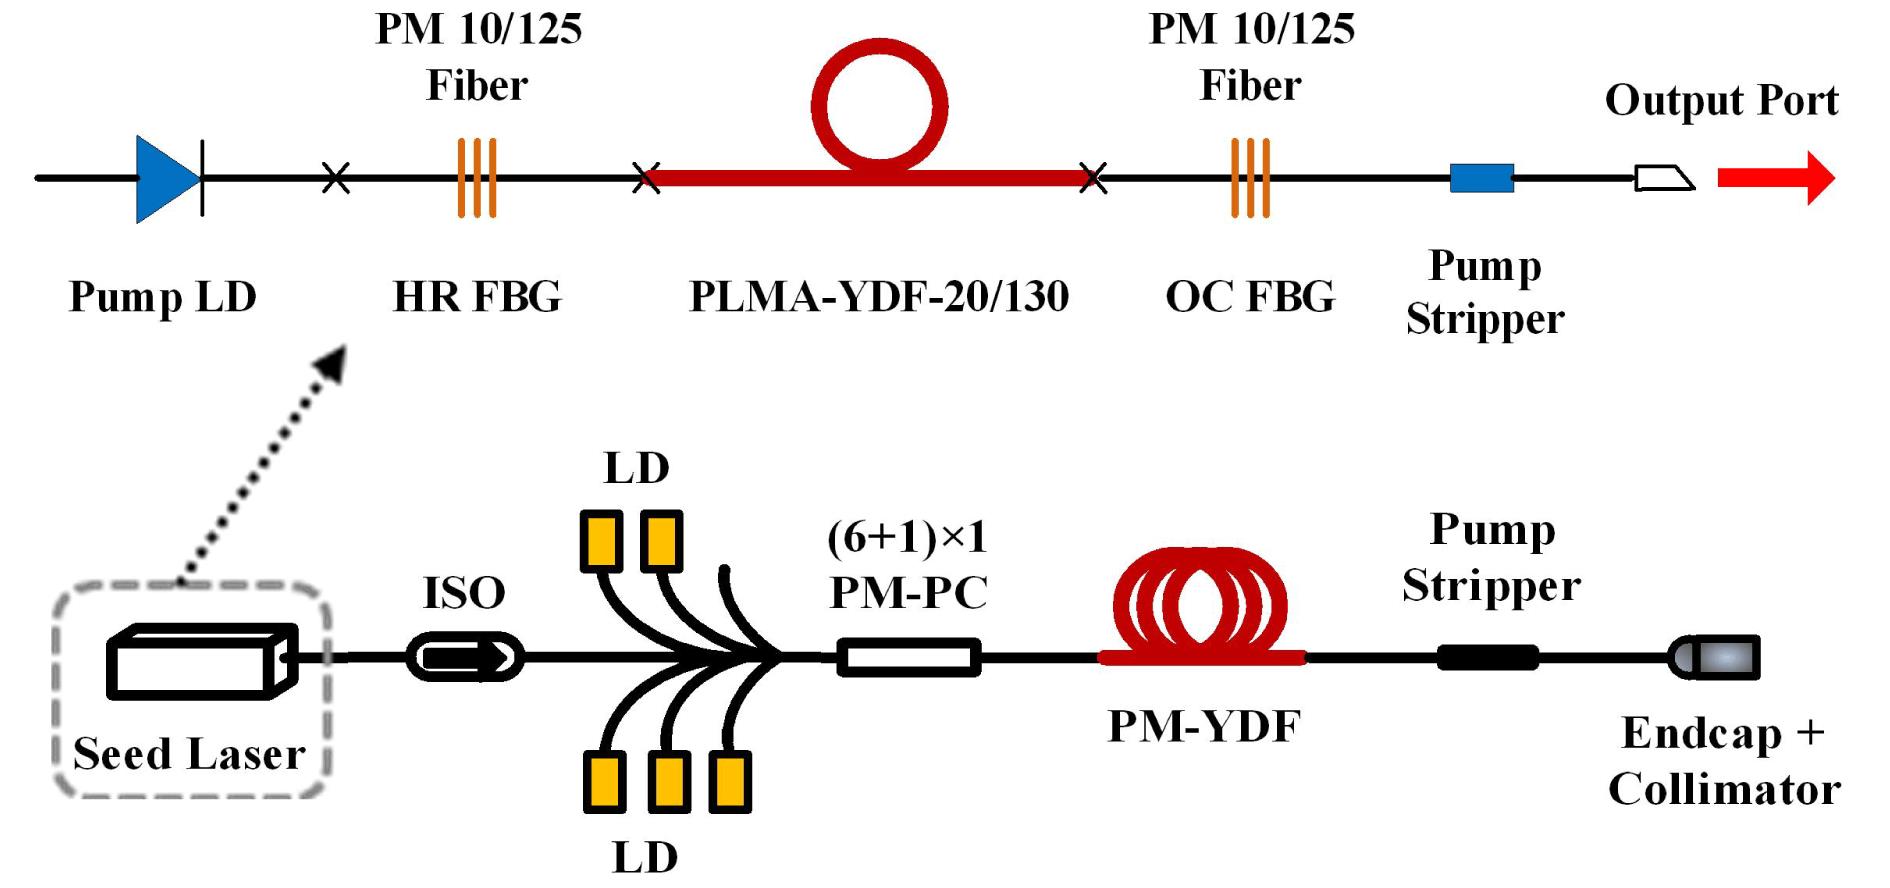 Experimental setup of the narrow-linewidth, linearly polarized seed laser and fiber amplifier. LD: laser diode; PC: polarization controller; ISO: isolator.